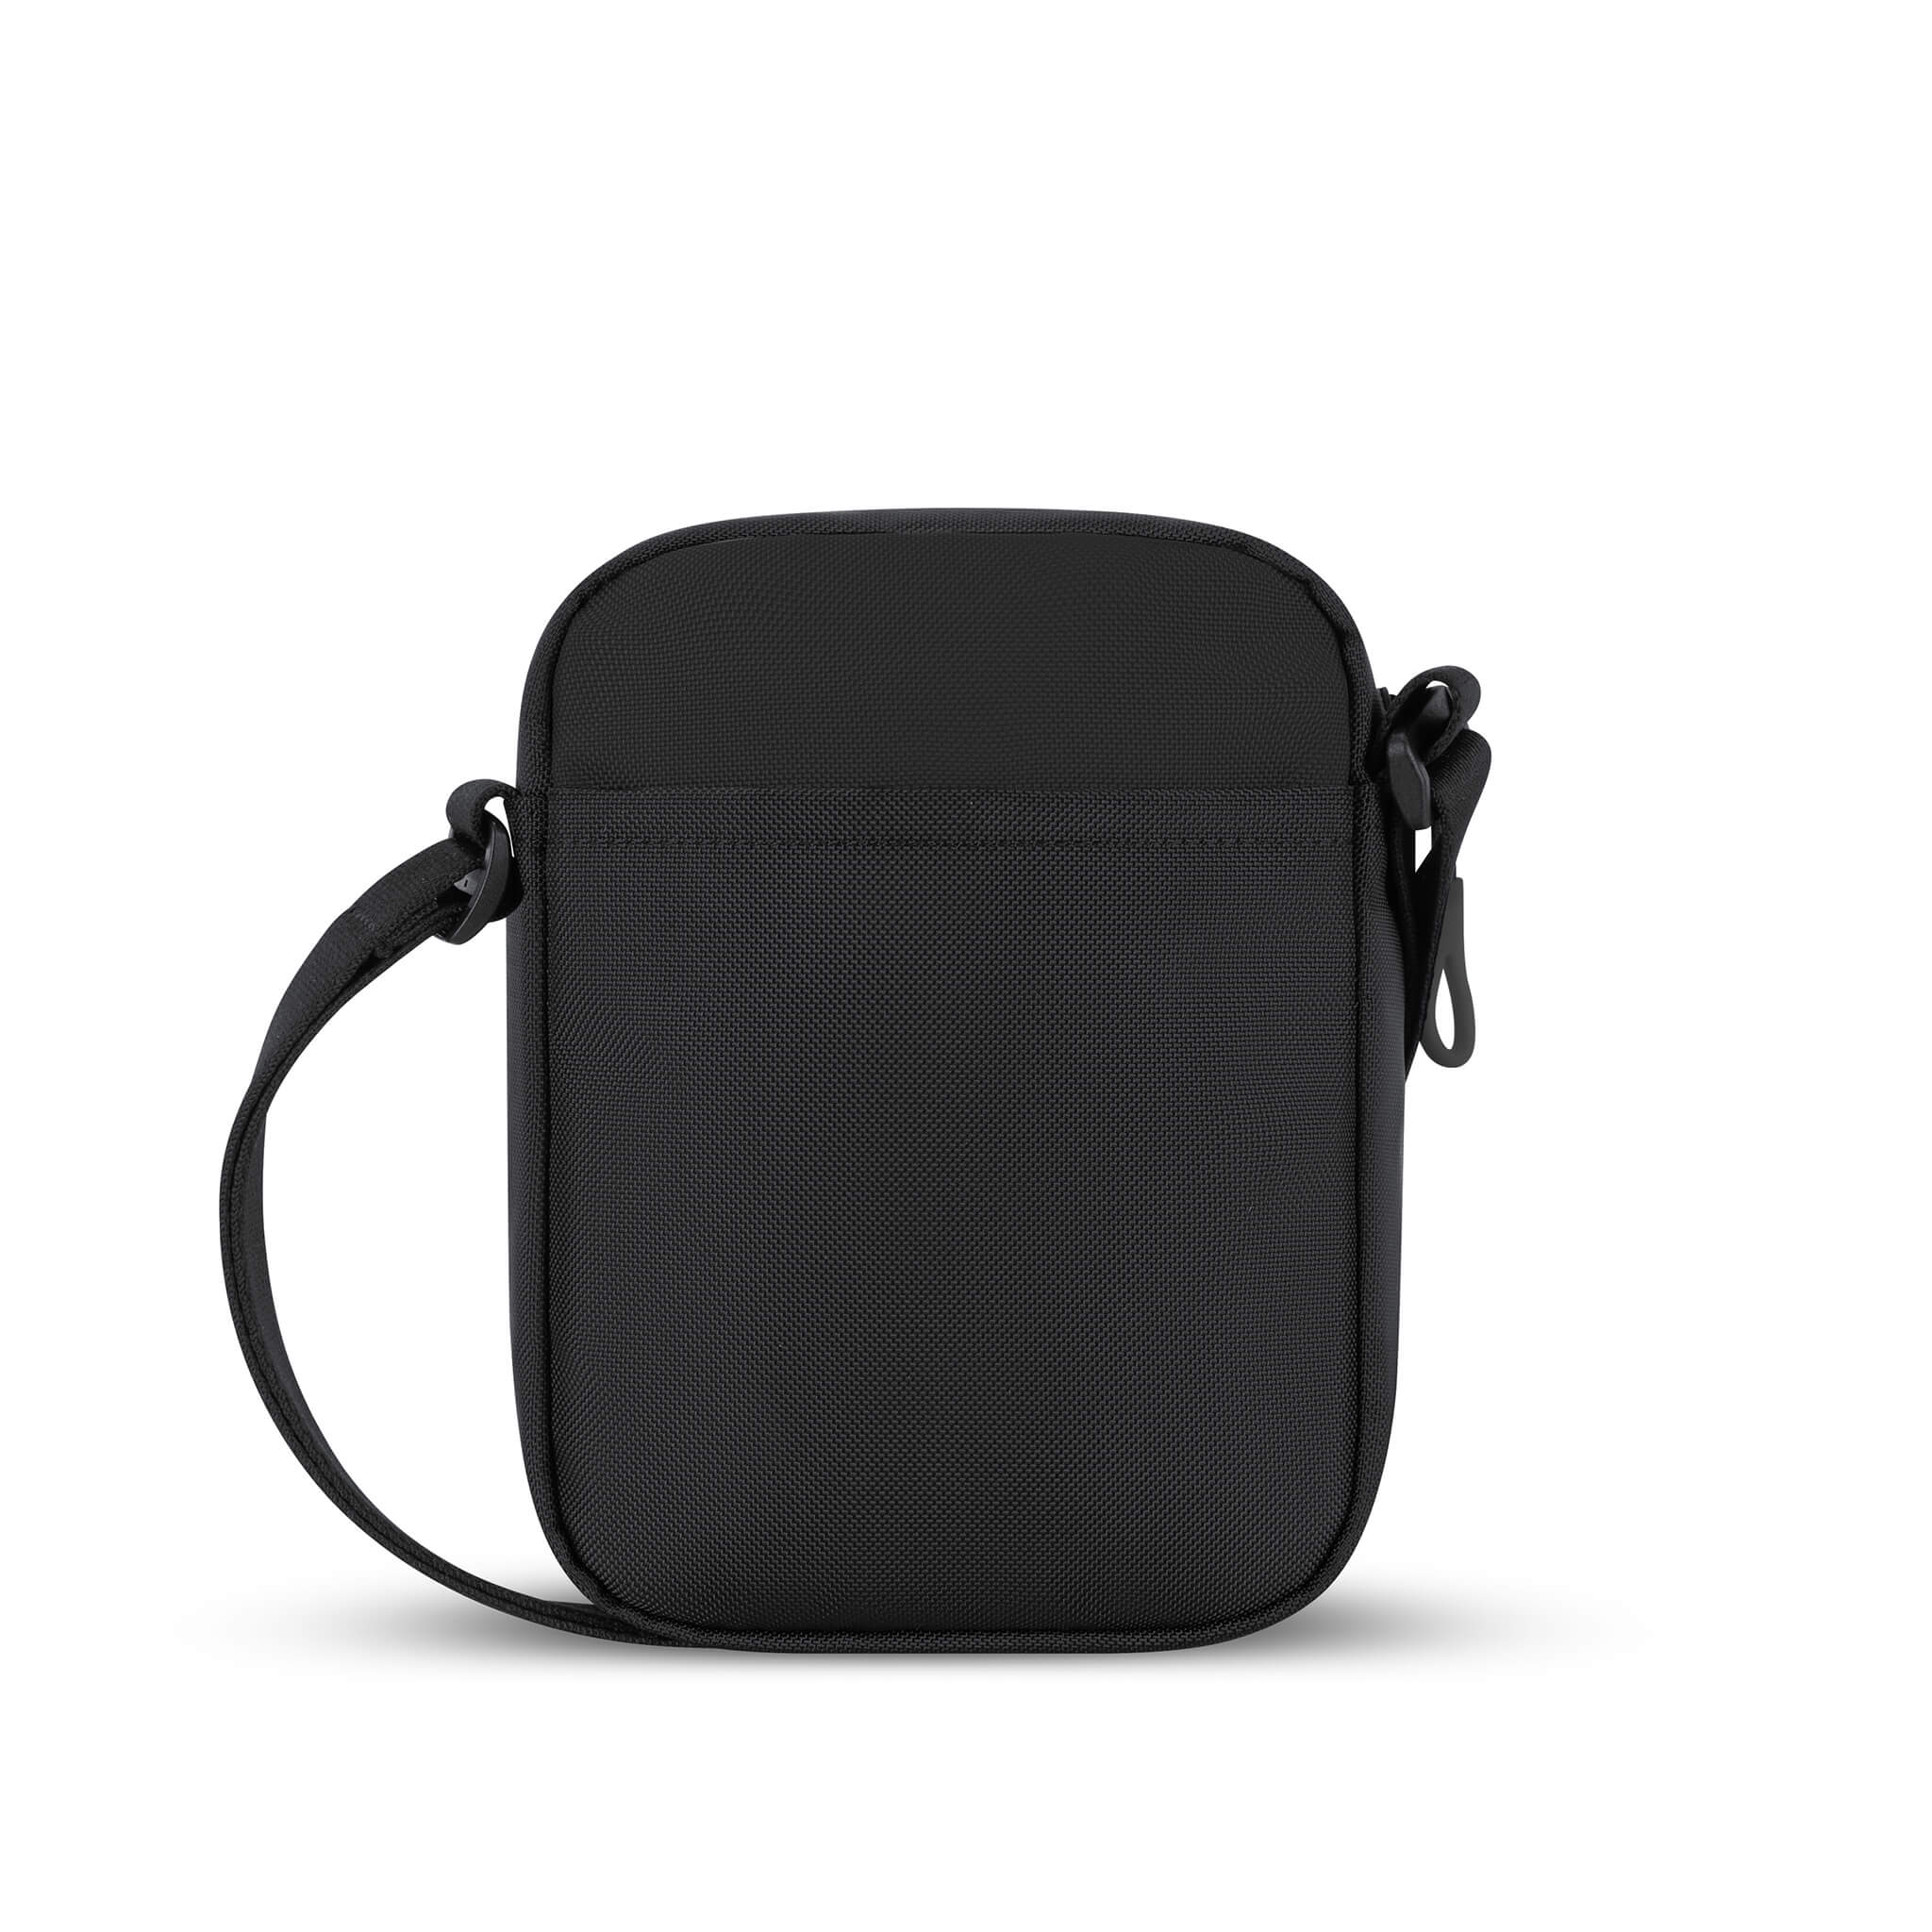 Back view of Sherpani mini crossbody purse, the Rogue in Raven. Rogue features include an adjustable crossbody strap, detachable keychain, compact design, minimalist bag, RFID protection and back slip pocket. The Raven color is true black with Sherpani edelweiss logo accented in white.